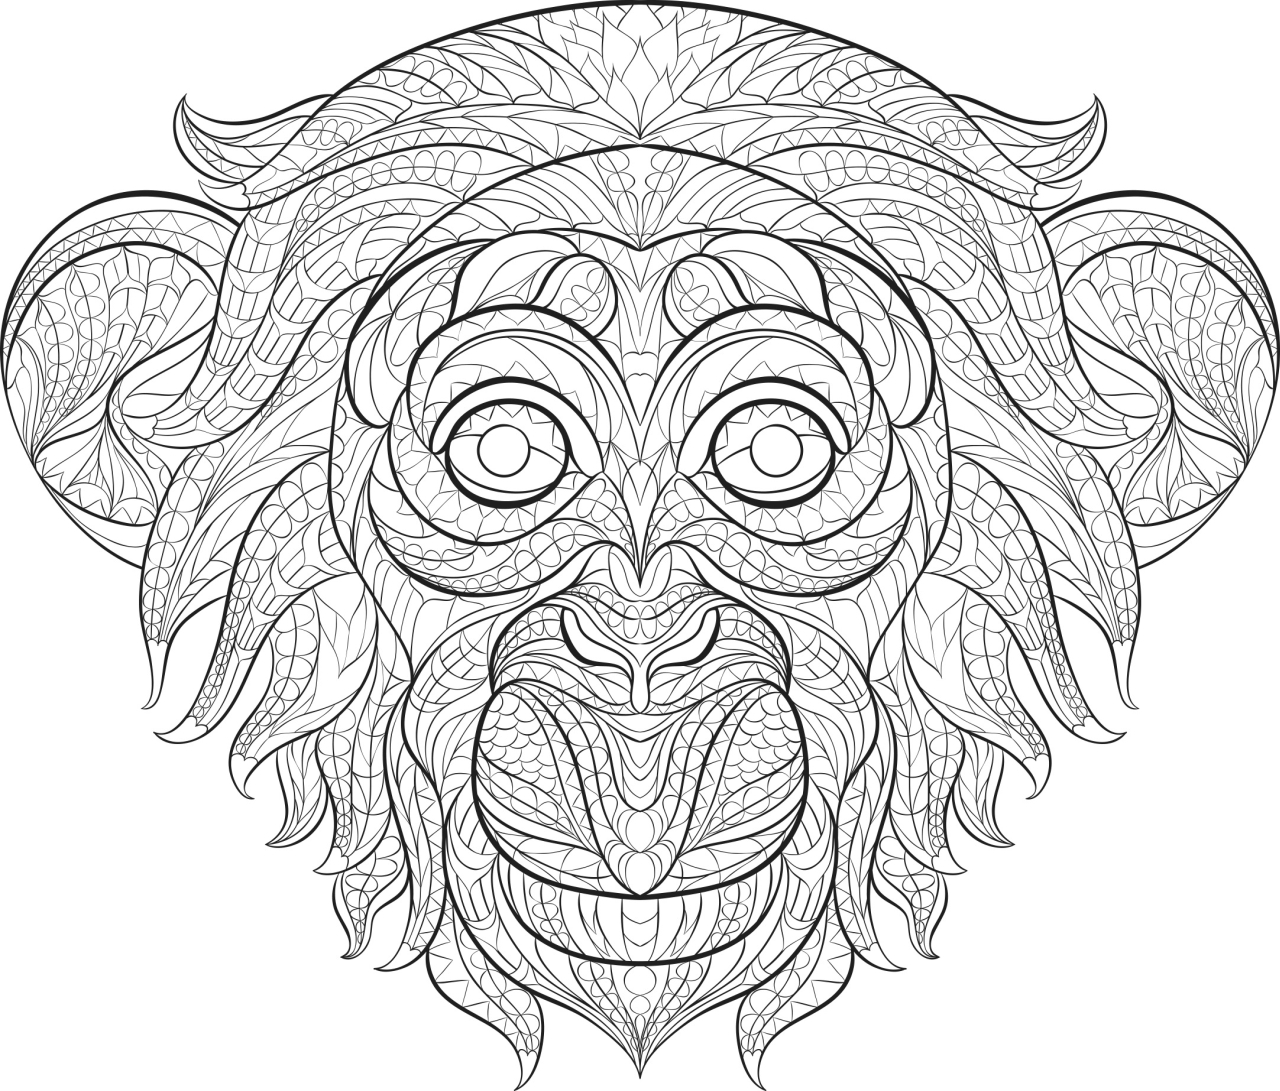 Get This Monkey Coloring Pages for Adults - 60731